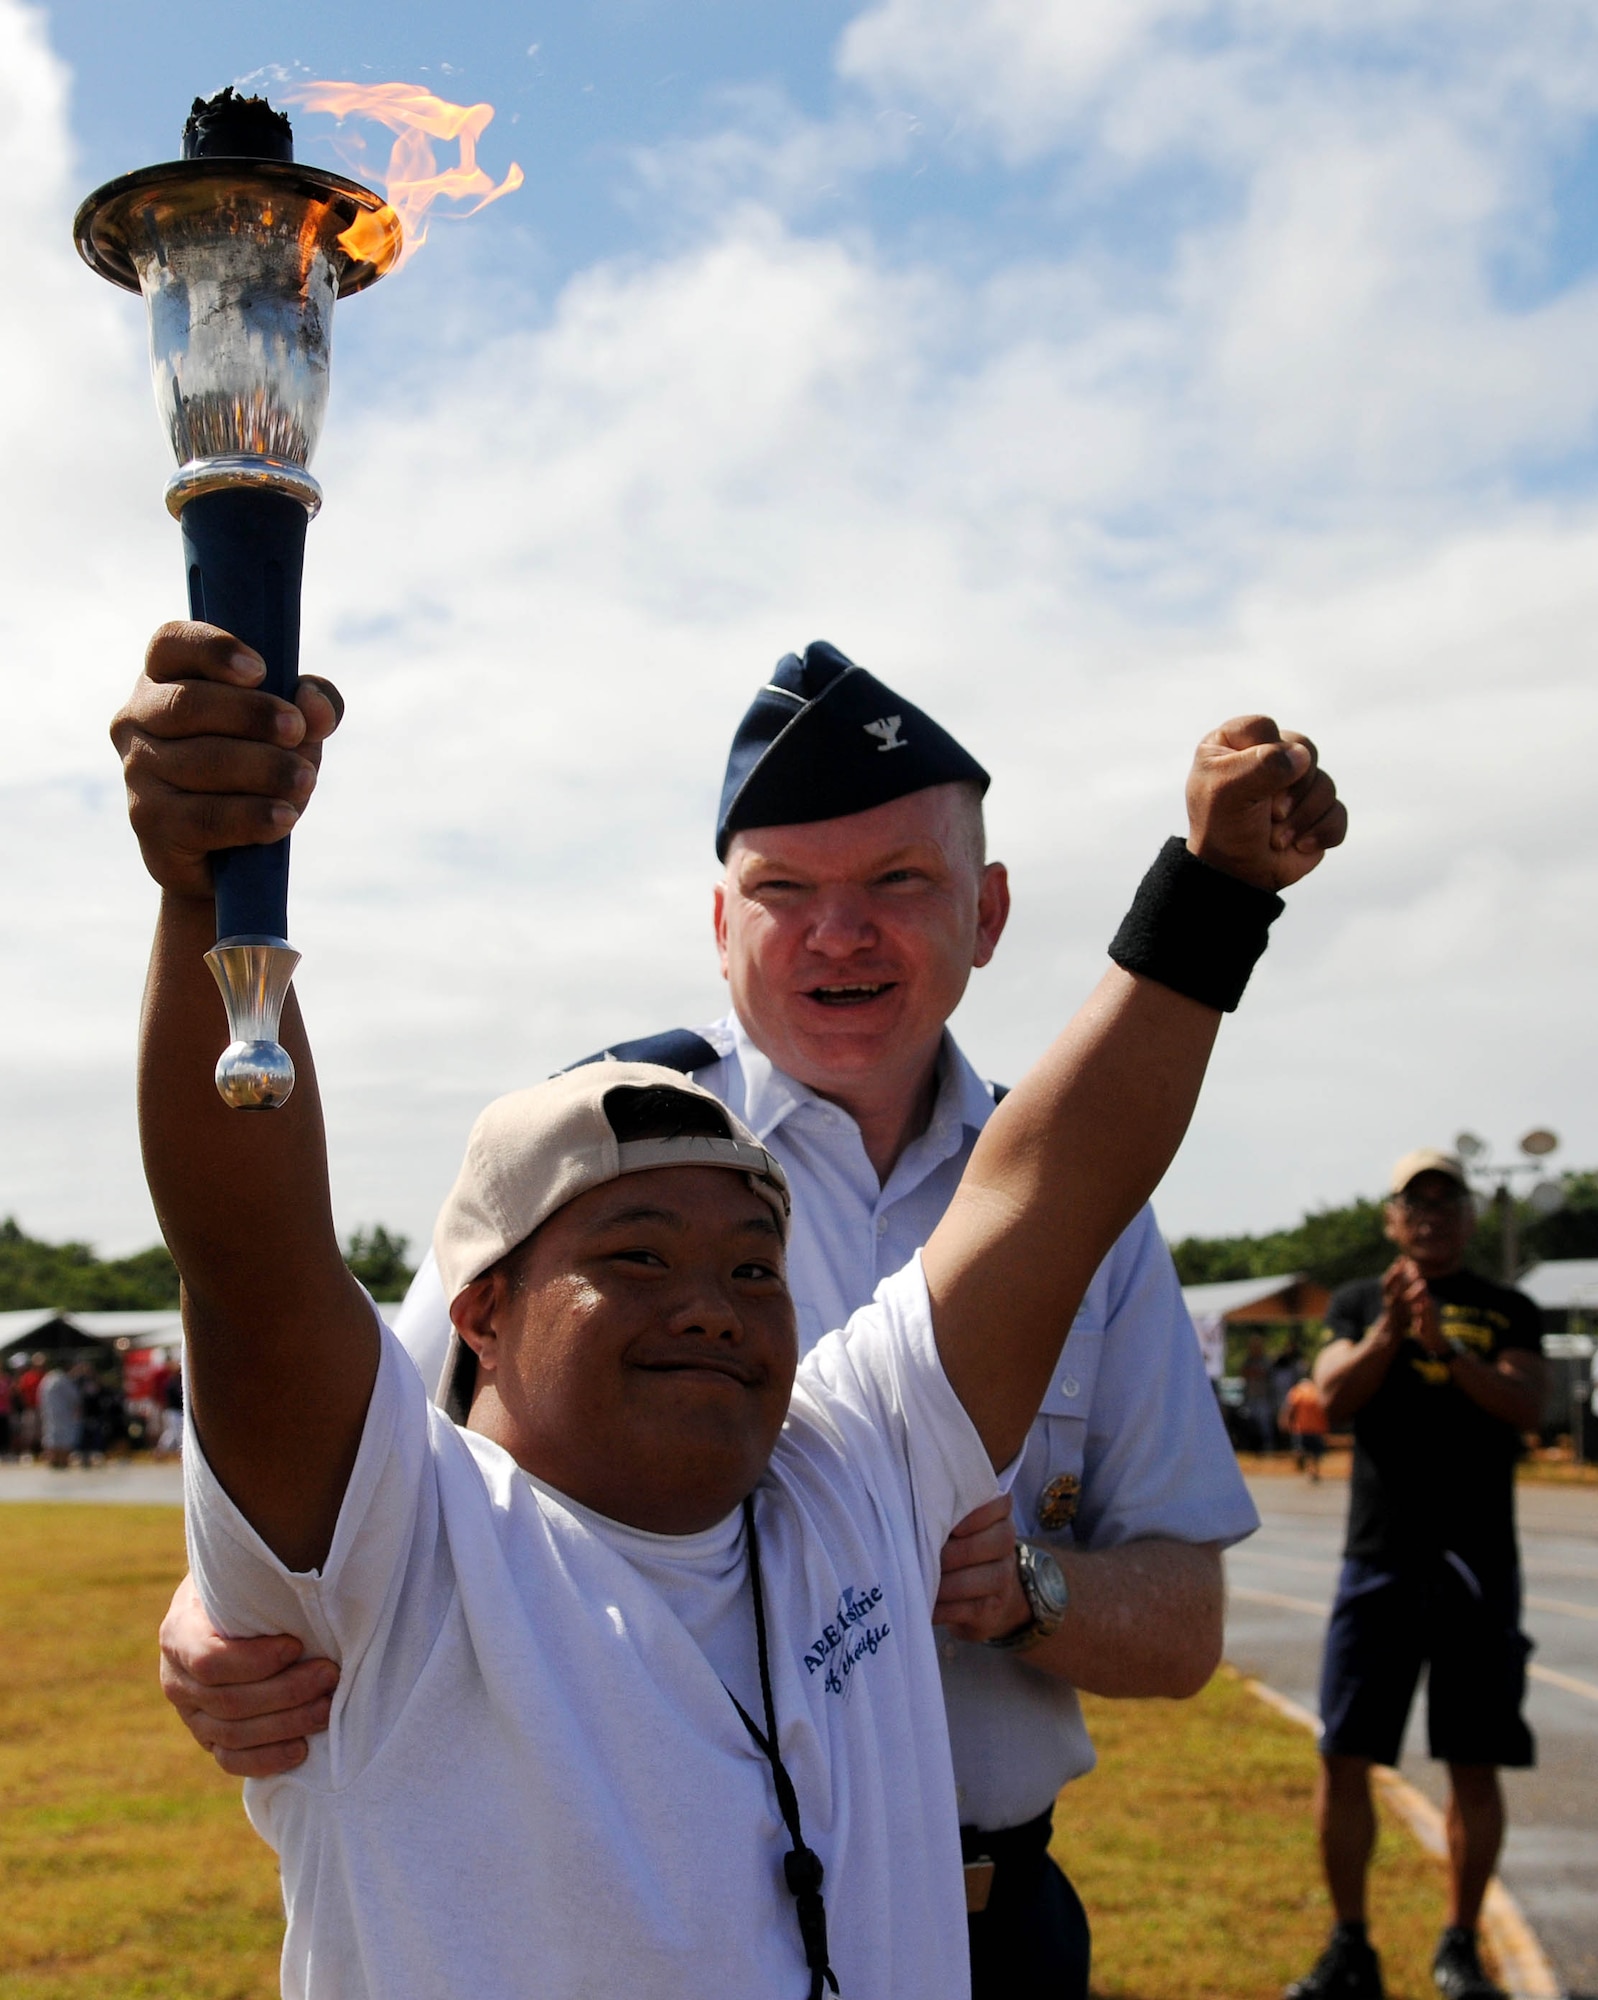 ANDERSEN AIR FORCE BASE, Guam - Andersen's 36th Mission Support Group
Commander, Col. Mark Talley, congratulates Quentin San Nicolas after his
final leg of the torch run during the 33rd Annual Special Olympics held at the Okkodo High School track March 14. Special Olympics Guam provides year-round sports training and competition in a variety of Olympic-type sports for children and adults with intellectual disabilities by giving them continuing opportunities to develop physical fitness, demonstrate courage, experience joy and participate in a sharing of gifts, skills and friendship with their families, other Special Olympics athletes and the island community. (U.S. Air Force photo by Airman 1st Class Courtney Witt)


